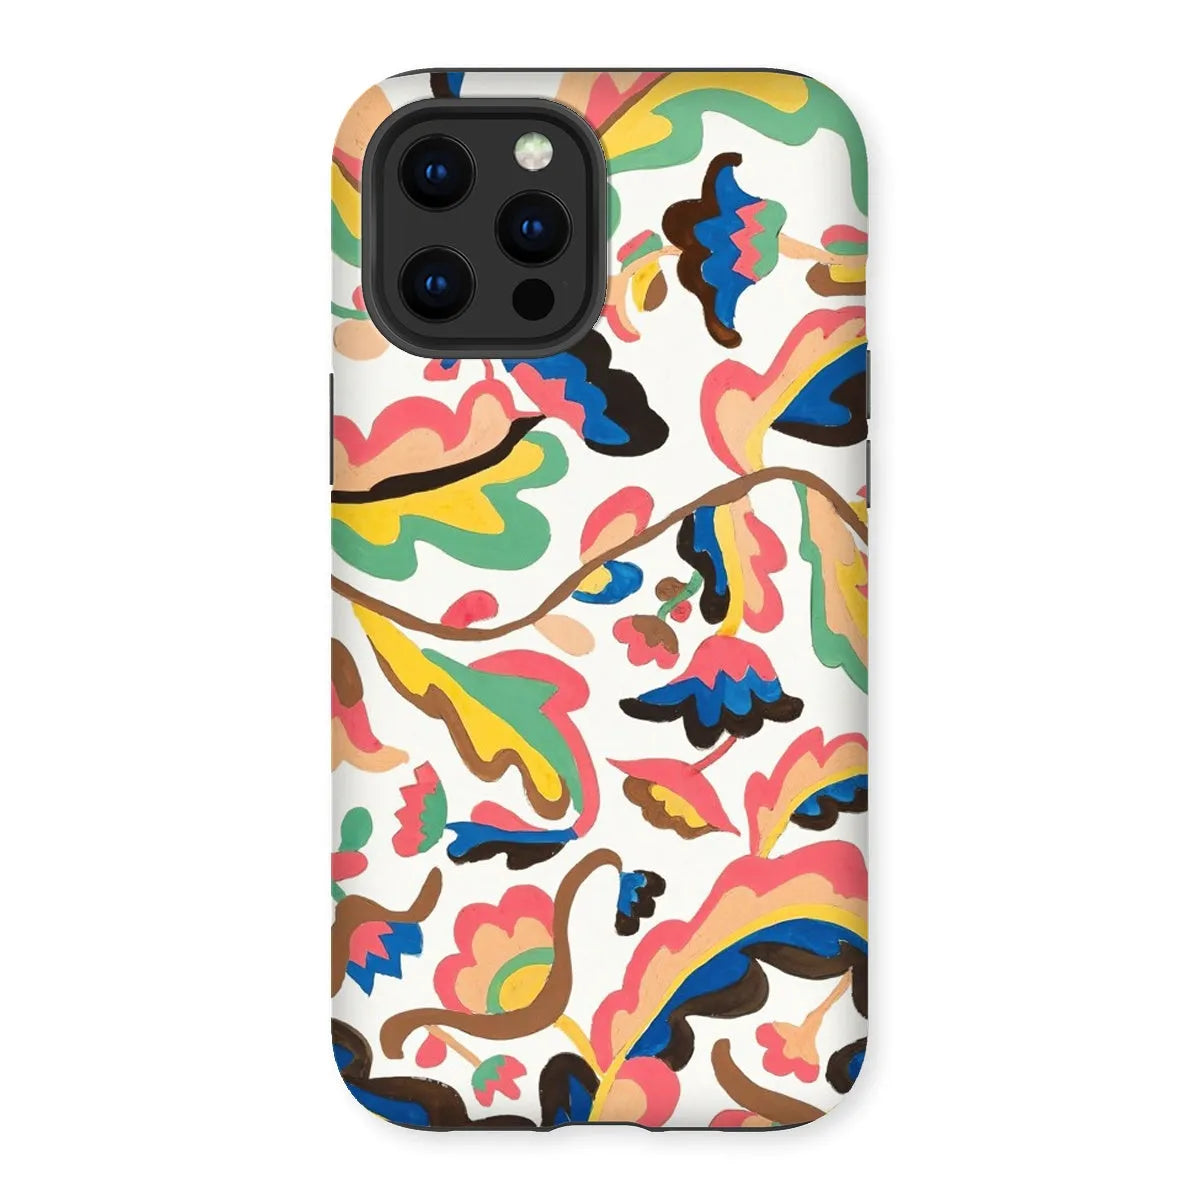 Colcha Floral Aesthetic Pattern Phone Case - Etna Wiswall - Iphone 12 Pro Max / Matte - Mobile Phone Cases - Aesthetic